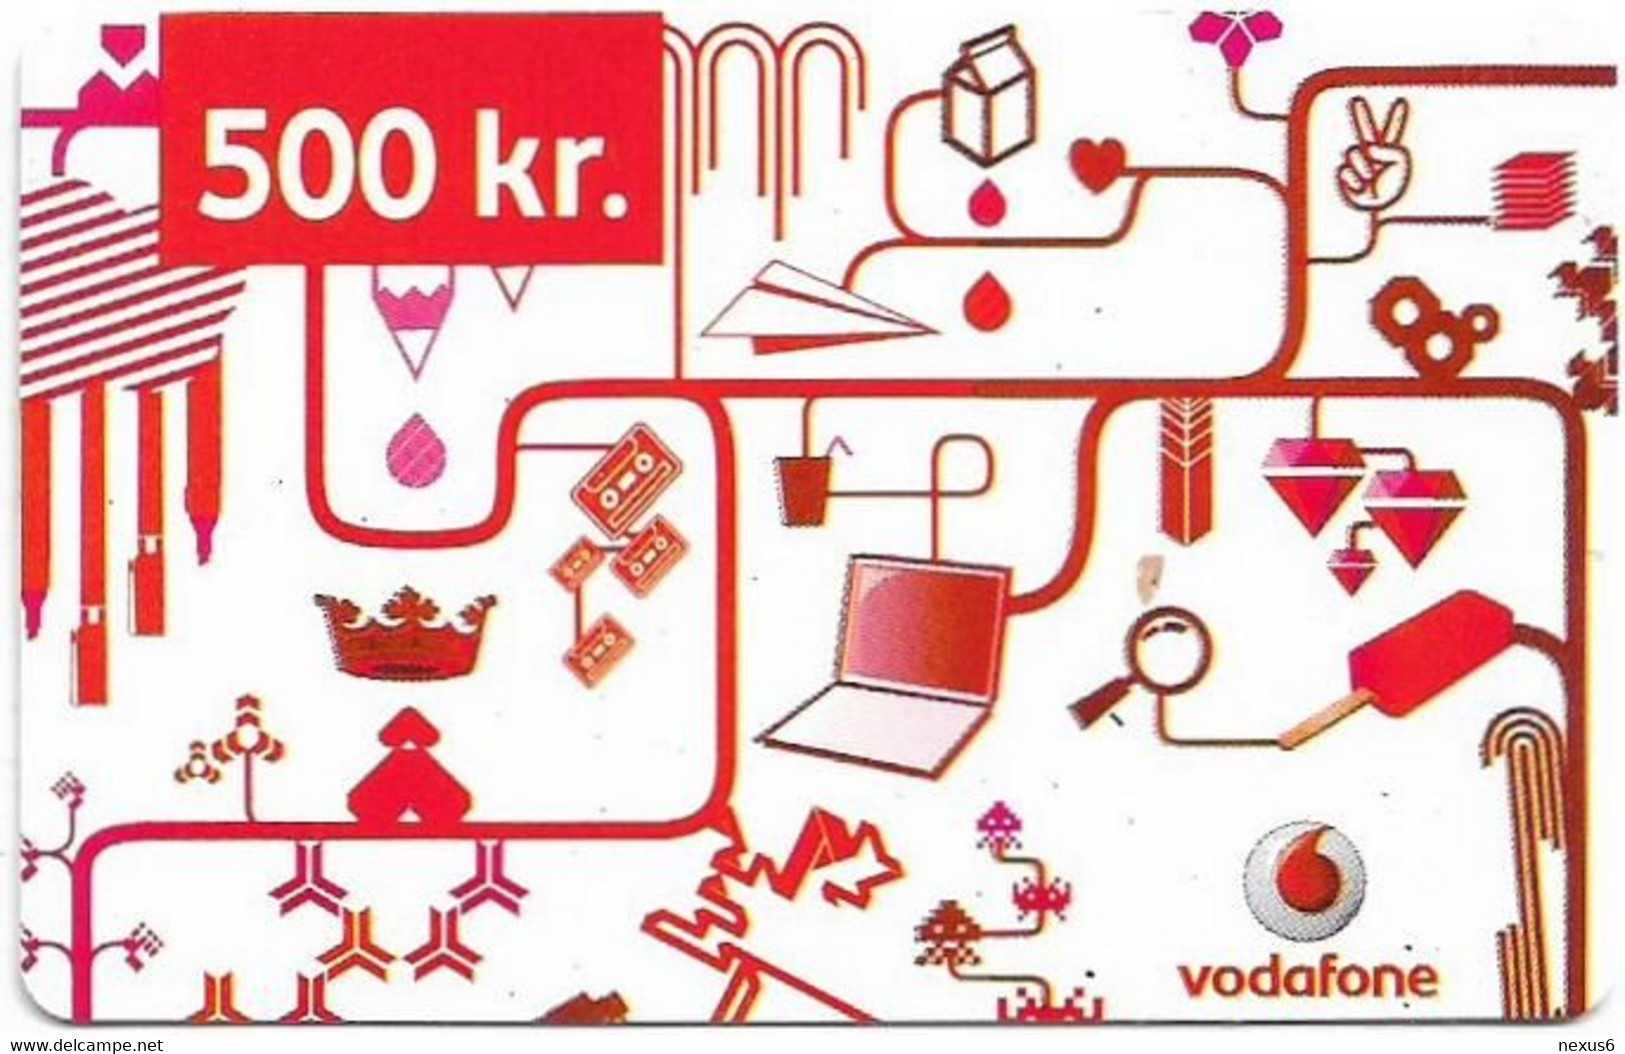 Iceland - Vodafone - Various Objects (Red), Exp.03.06.2009, GSM Refill 500Kr, Used - Islandia